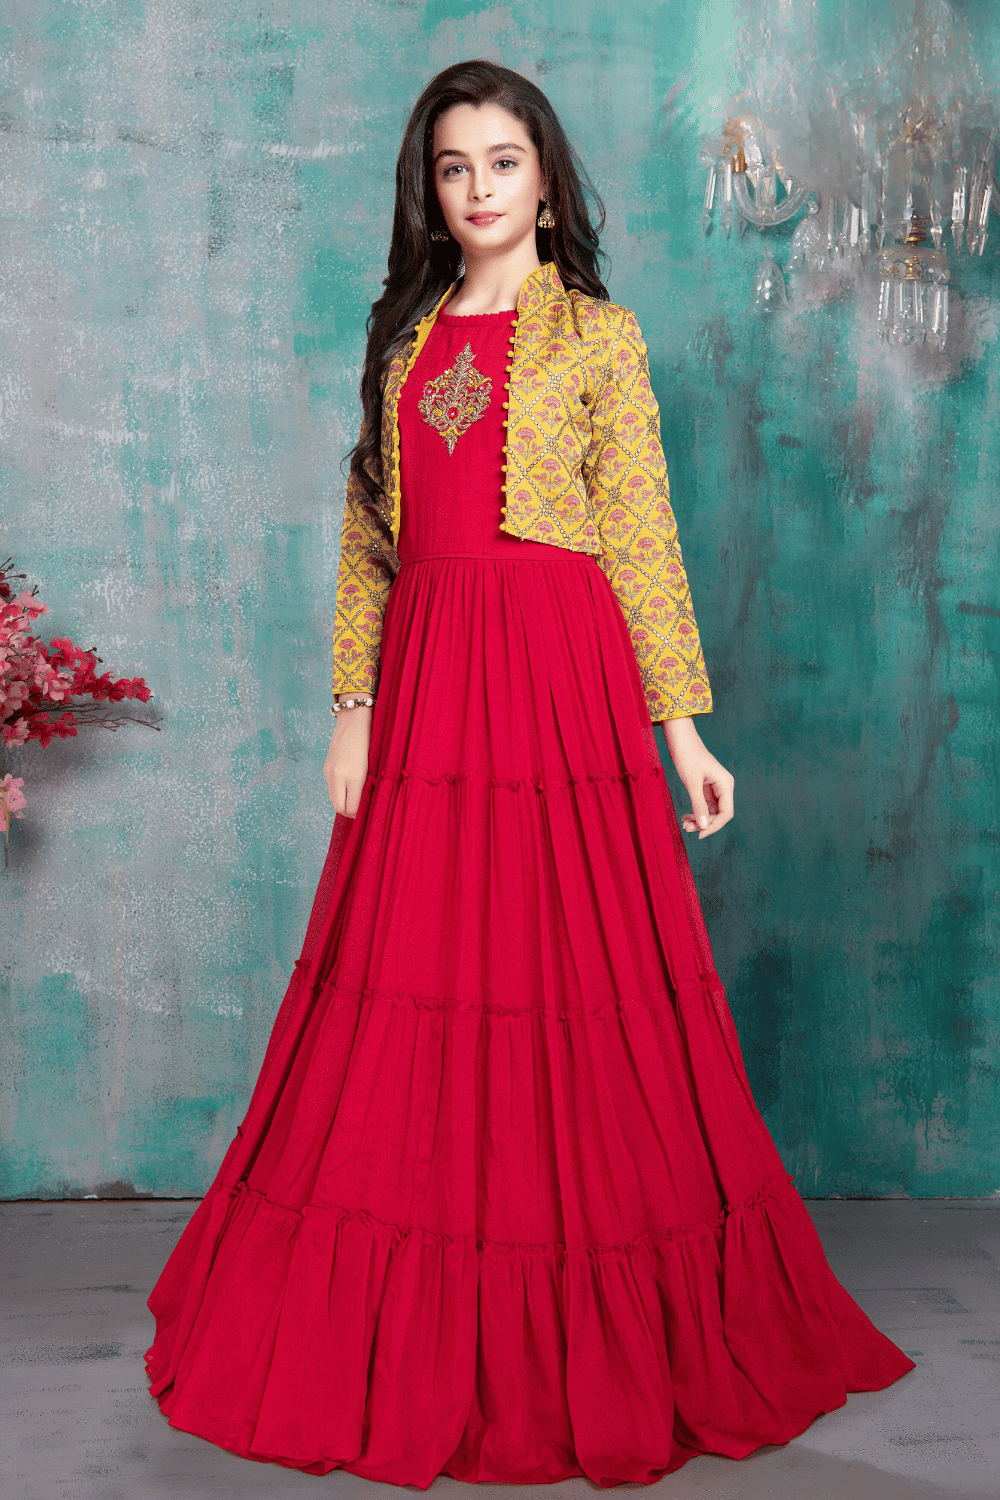 Yellow with Rani Pink Sequins and Zari Thread work Overcoat Styled Long Gown For Girls - Seasons Chennai